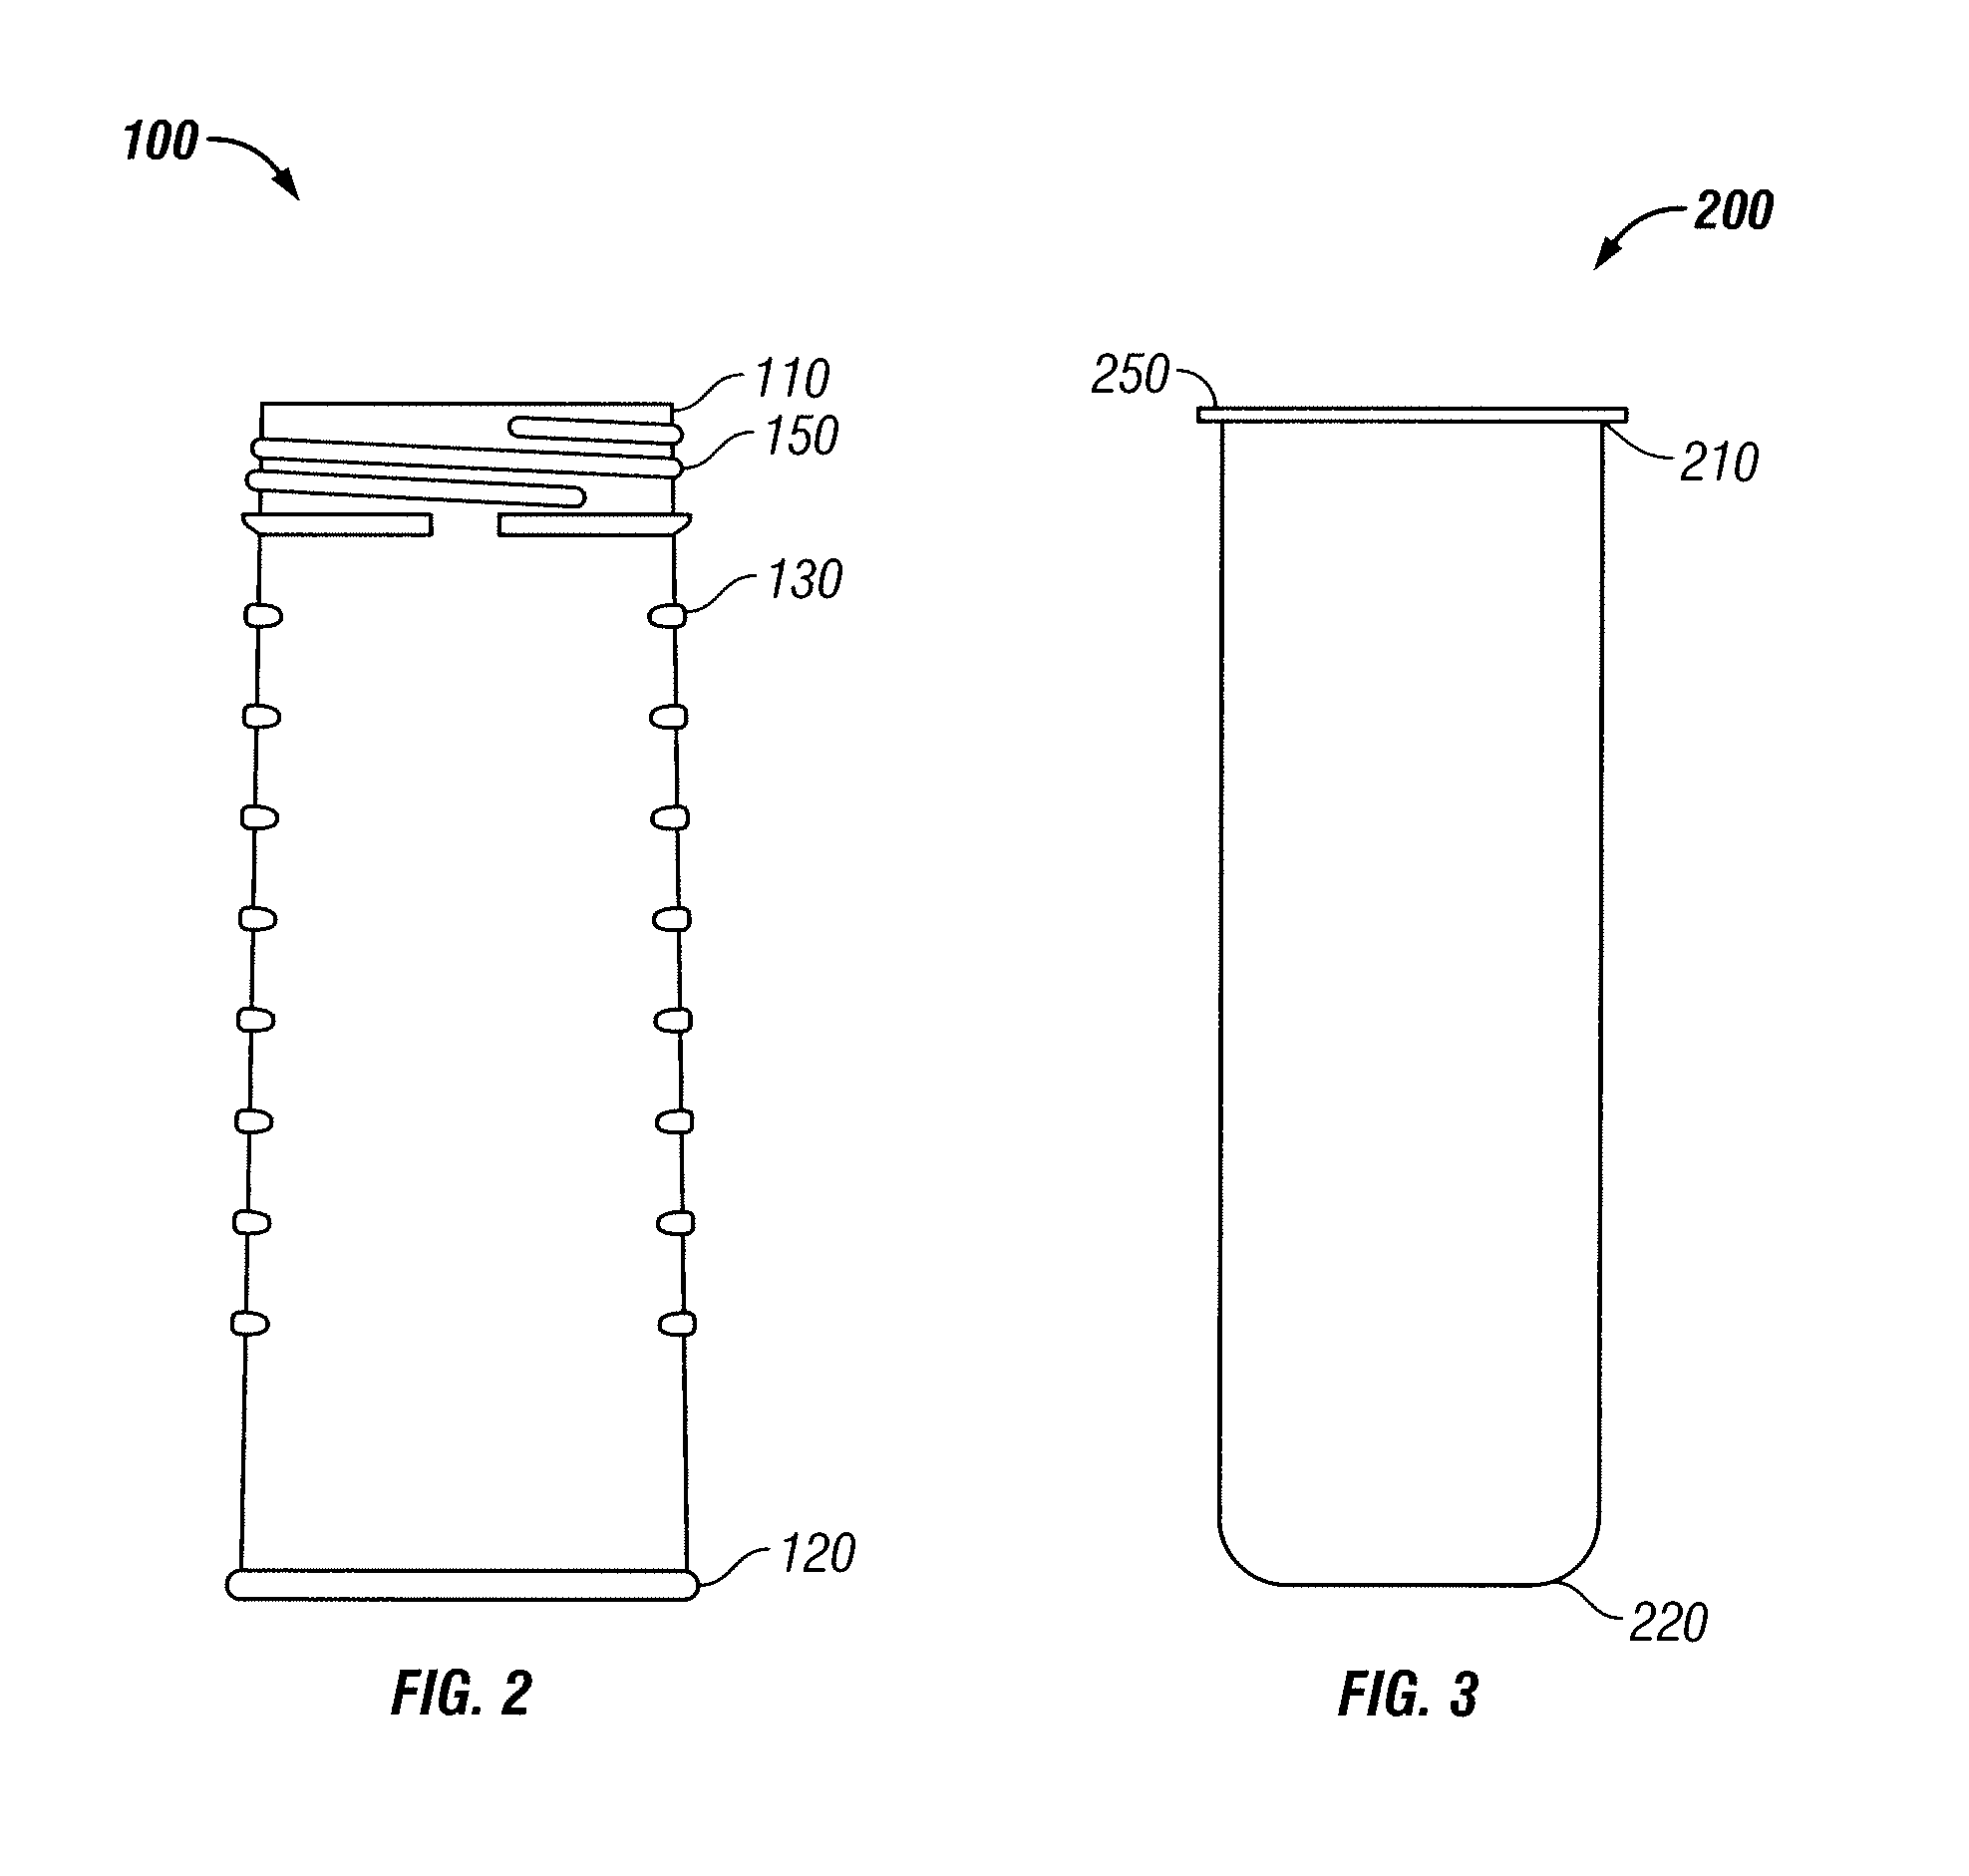 Enteral feeding safety reservoir and system